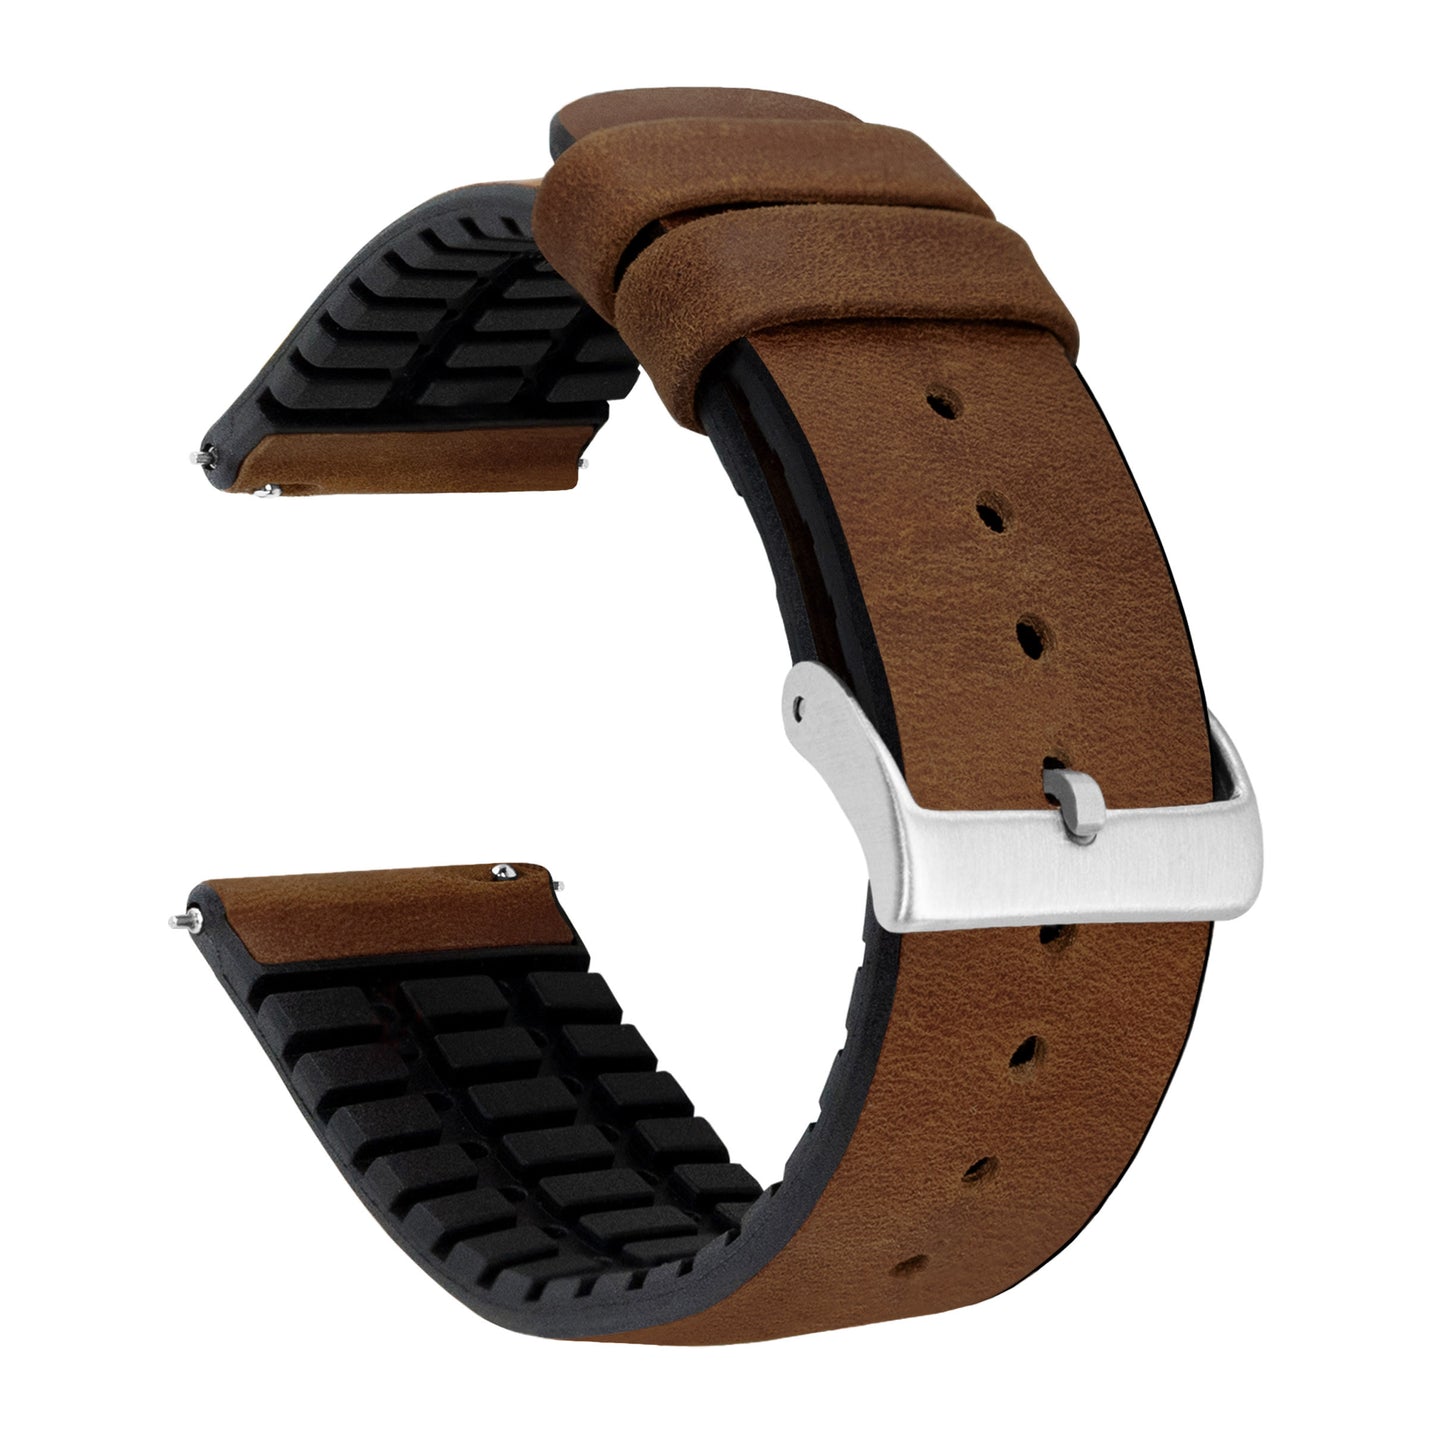 Samsung Galaxy Watch Active 2 | Leather and Rubber Hybrid | Oak Brown - Barton Watch Bands